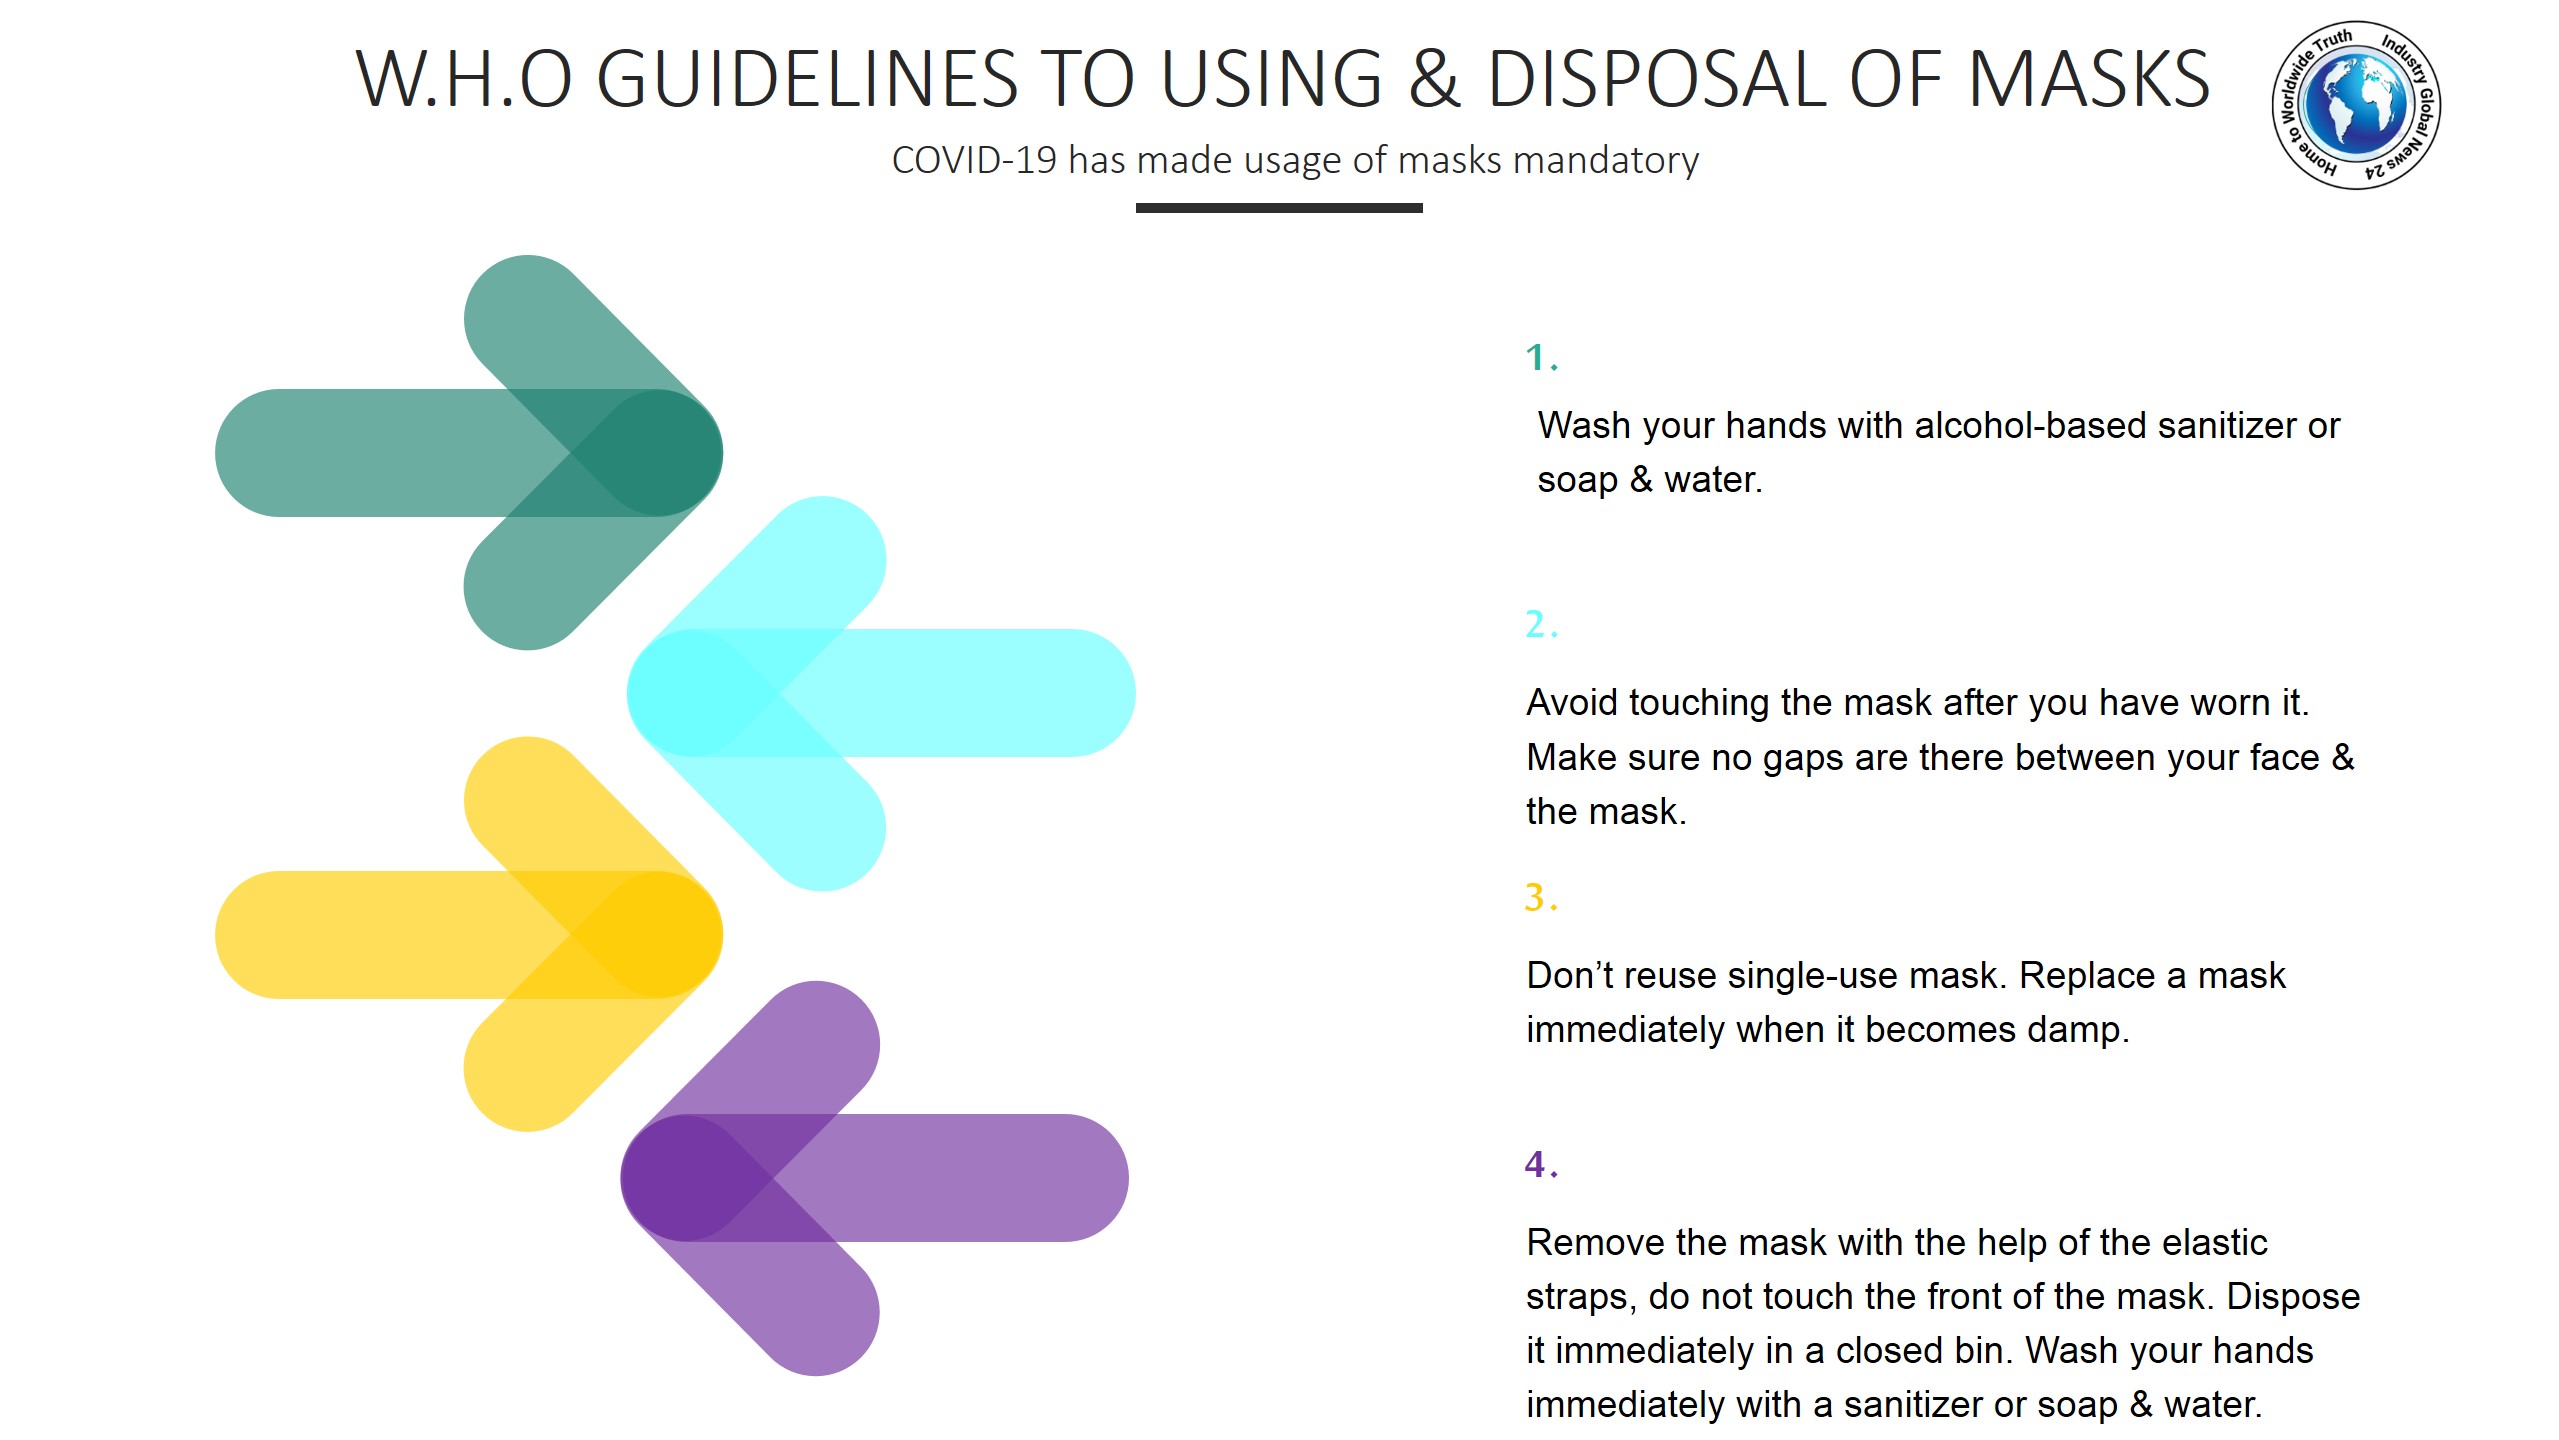 WHO guidelines to using & disposal of masks